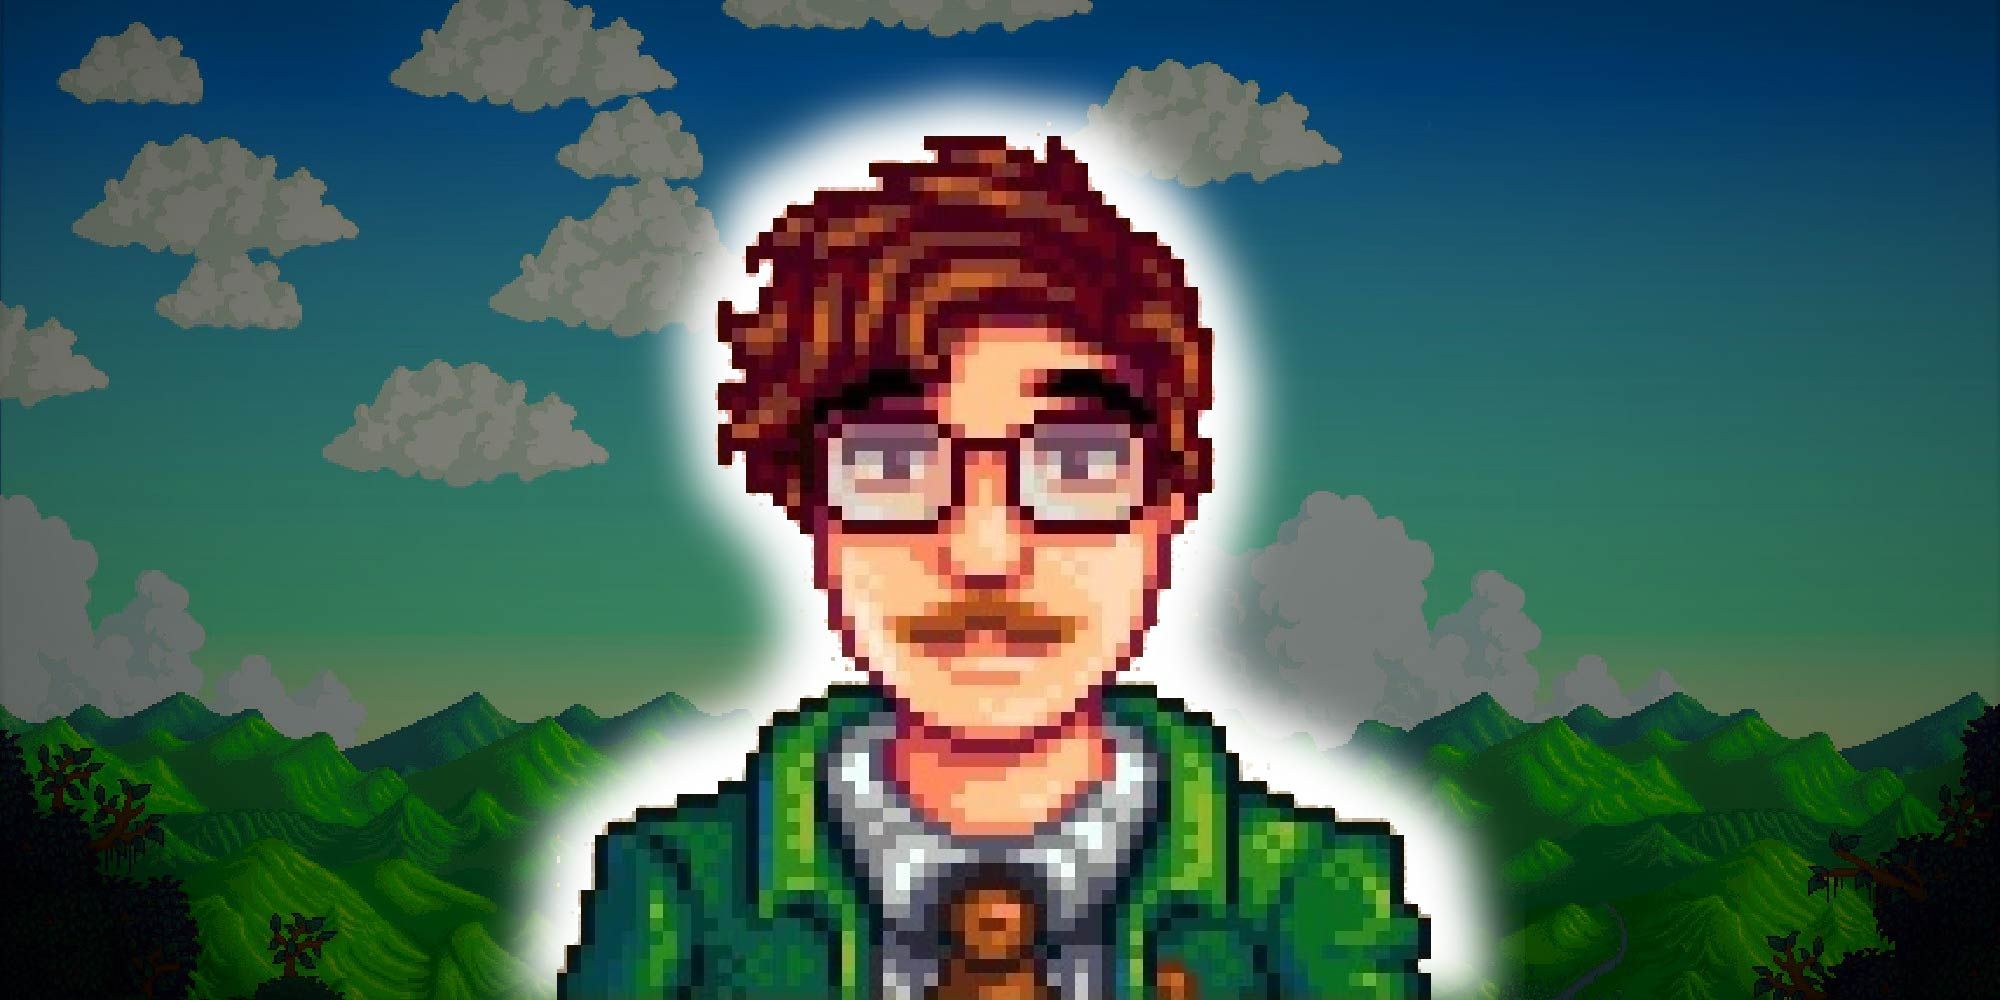 Harvey from Stardew Valley in front of the background from the game's opening.